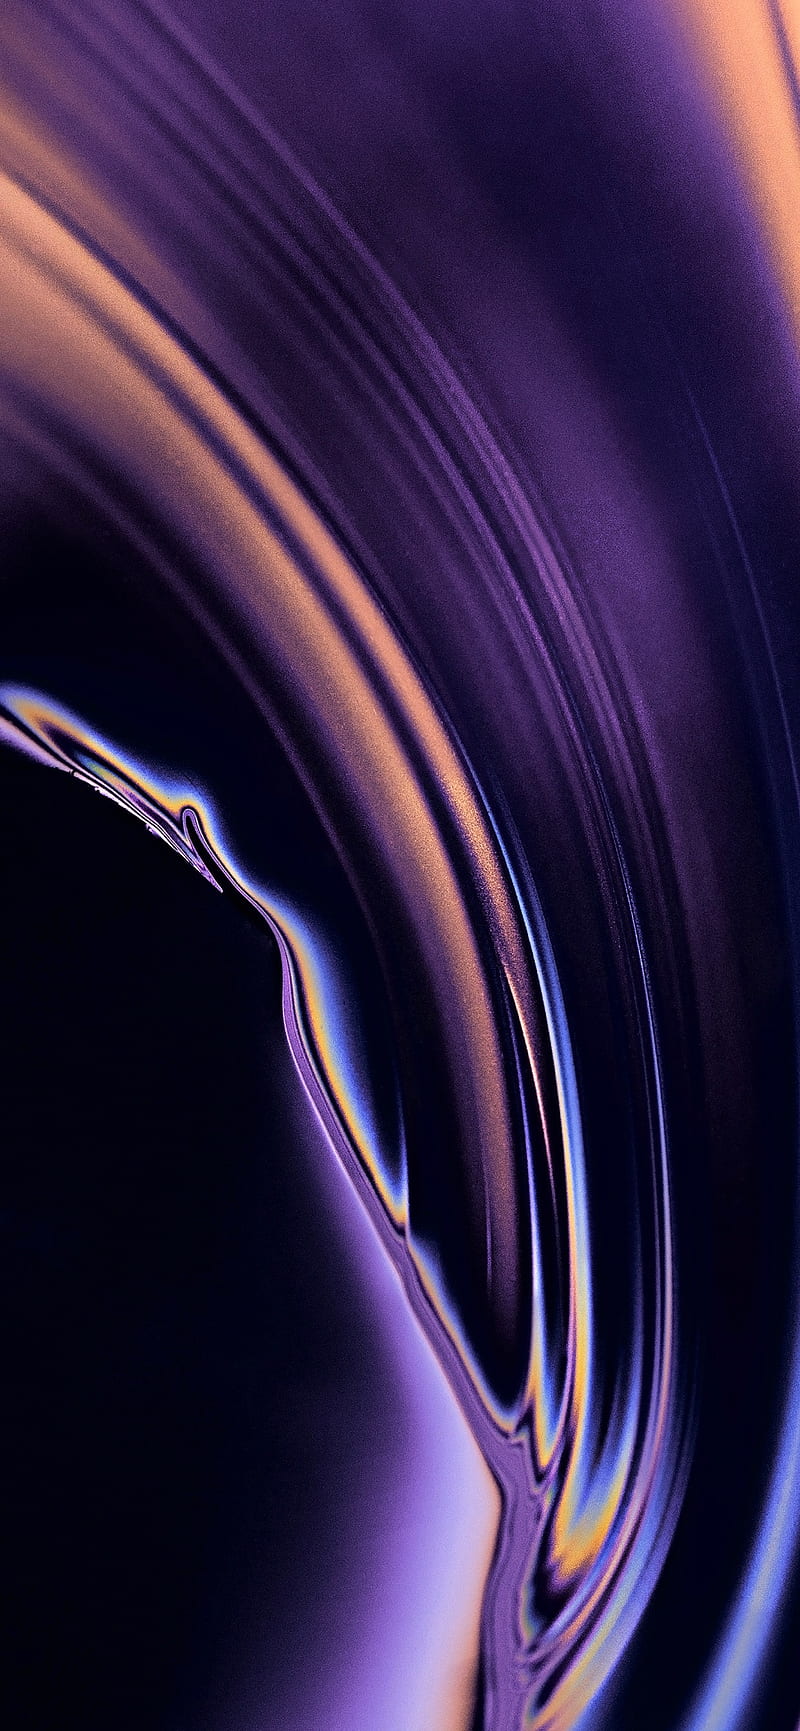 Weekends: Abstract iPhone From the macOS Folder, Art Cool Abstract, HD phone wallpaper